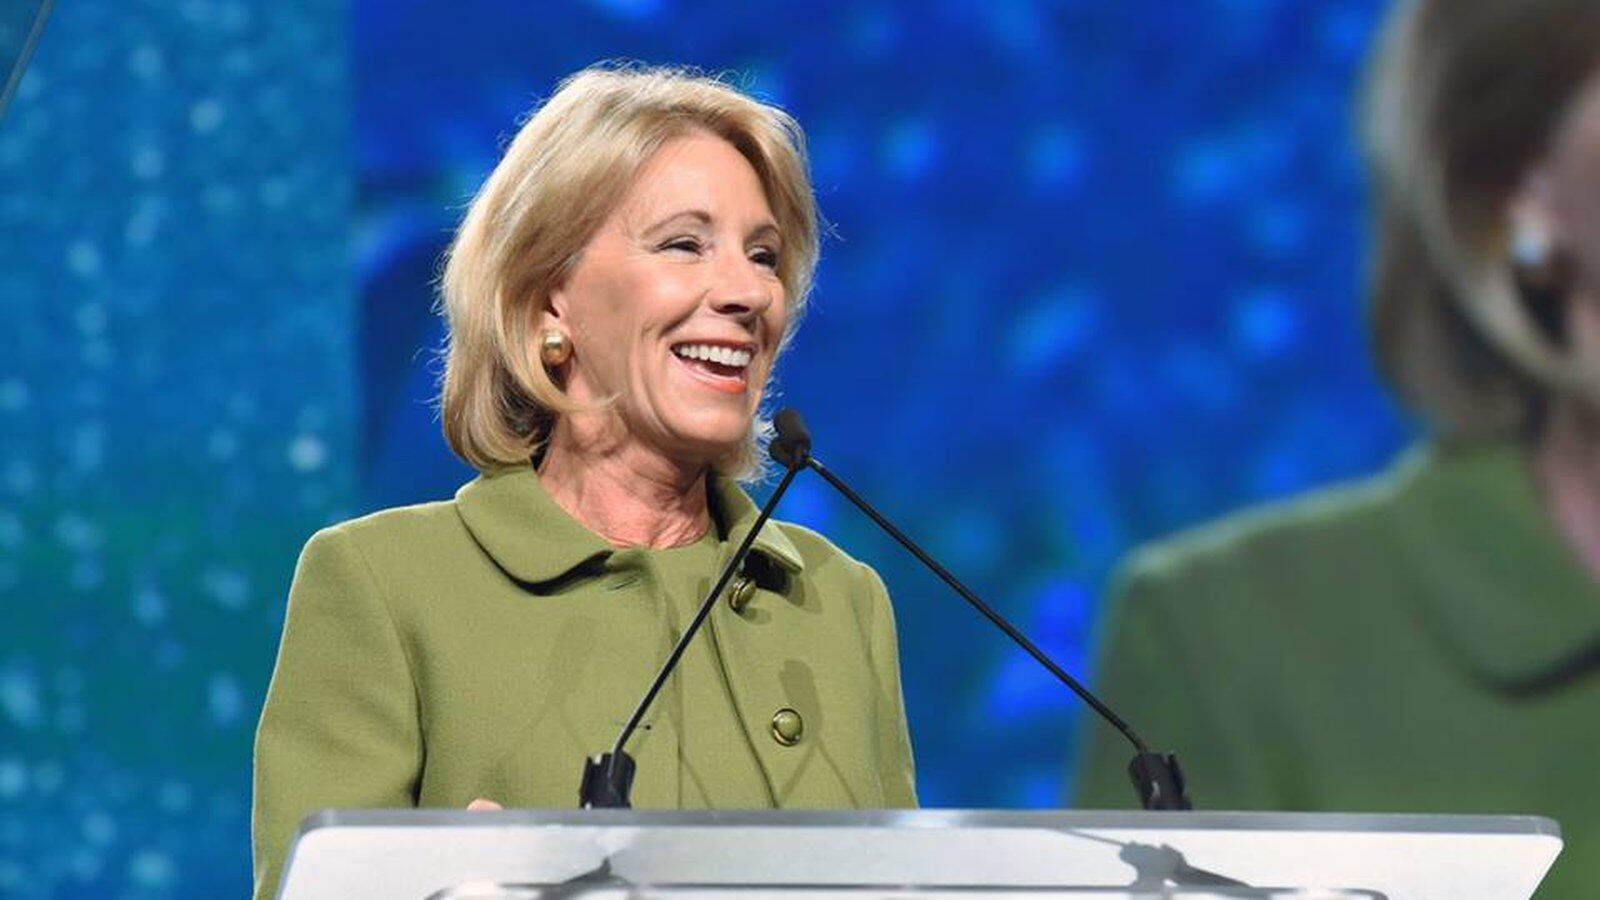 U.S. Secretary of Education Betsy DeVos speks in 2017 at a National Summit on Education Reform meeting in Nashville, Tennessee.